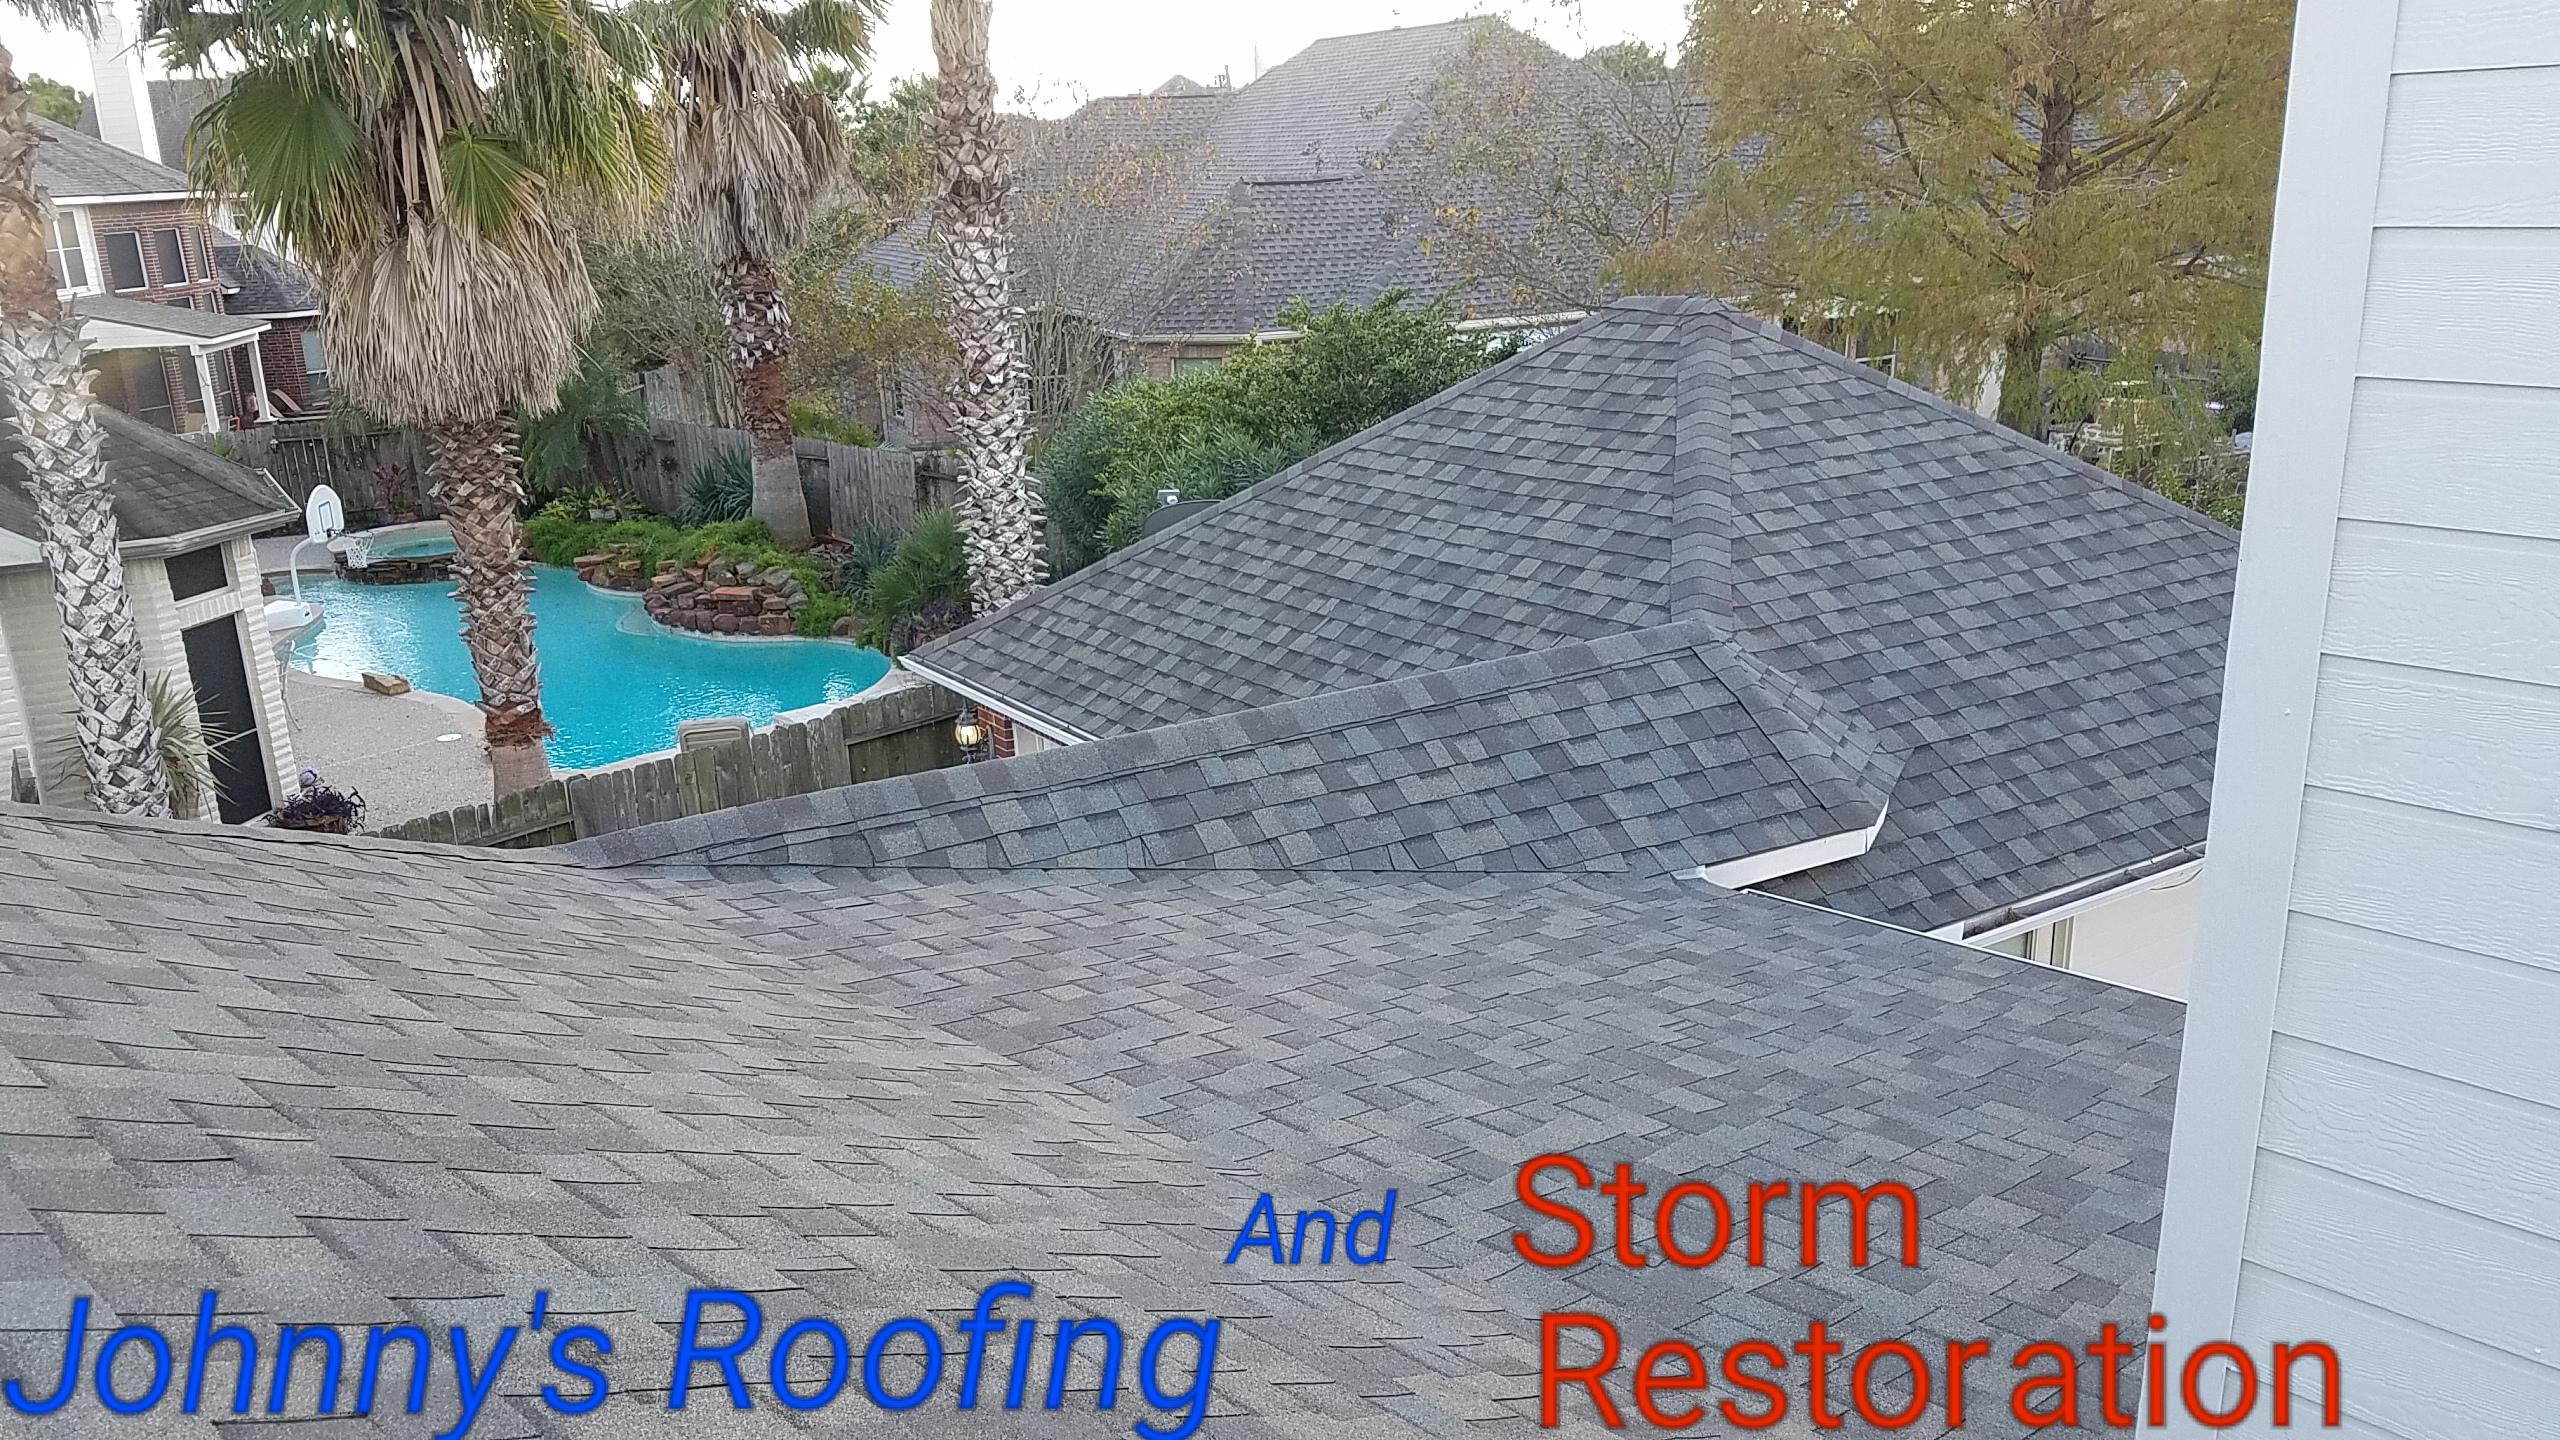 Johnny's Roofing and Storm Restoration Logo